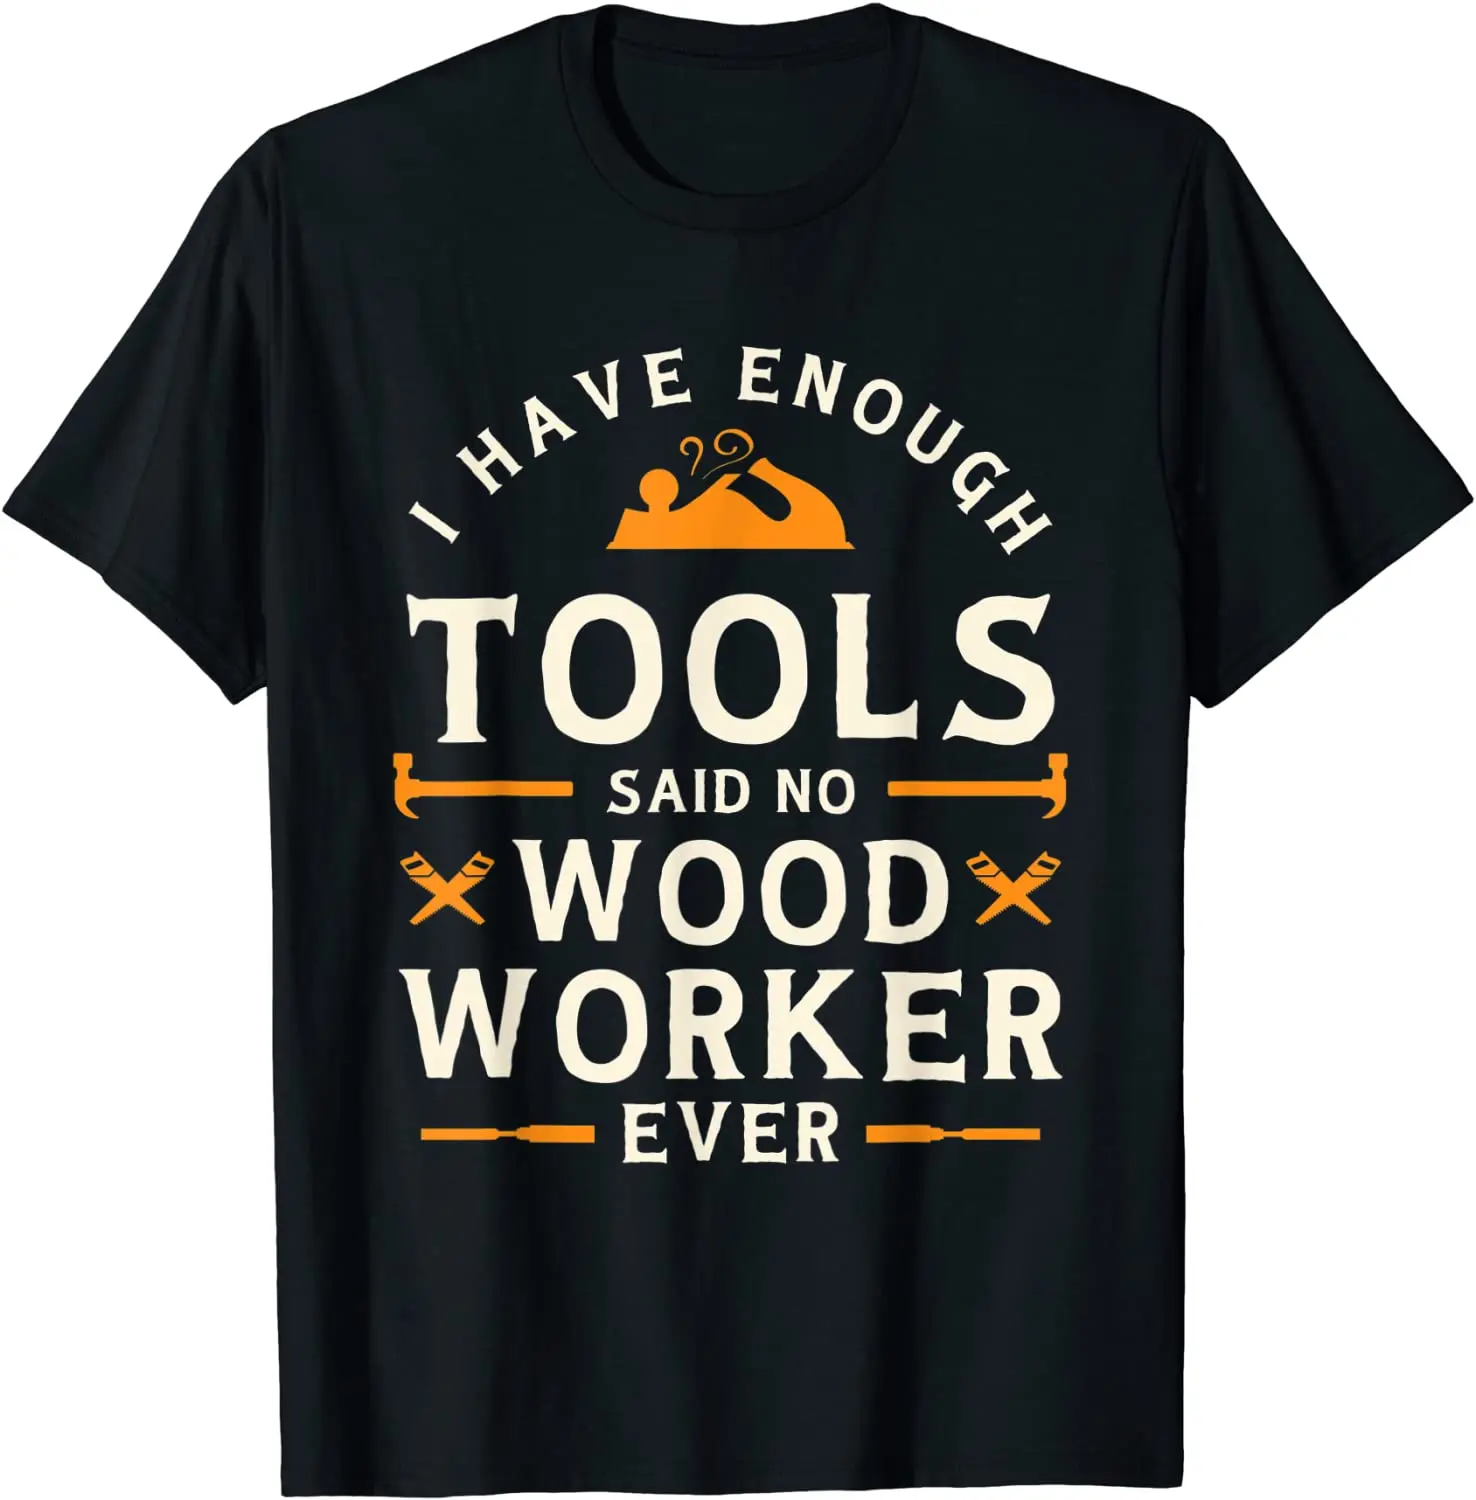 

I have Enough Tools Said No Woodworker Ever - Woodworking T-Shirt Cotton Tshirts for Men Unique T Shirt Fitted Cool